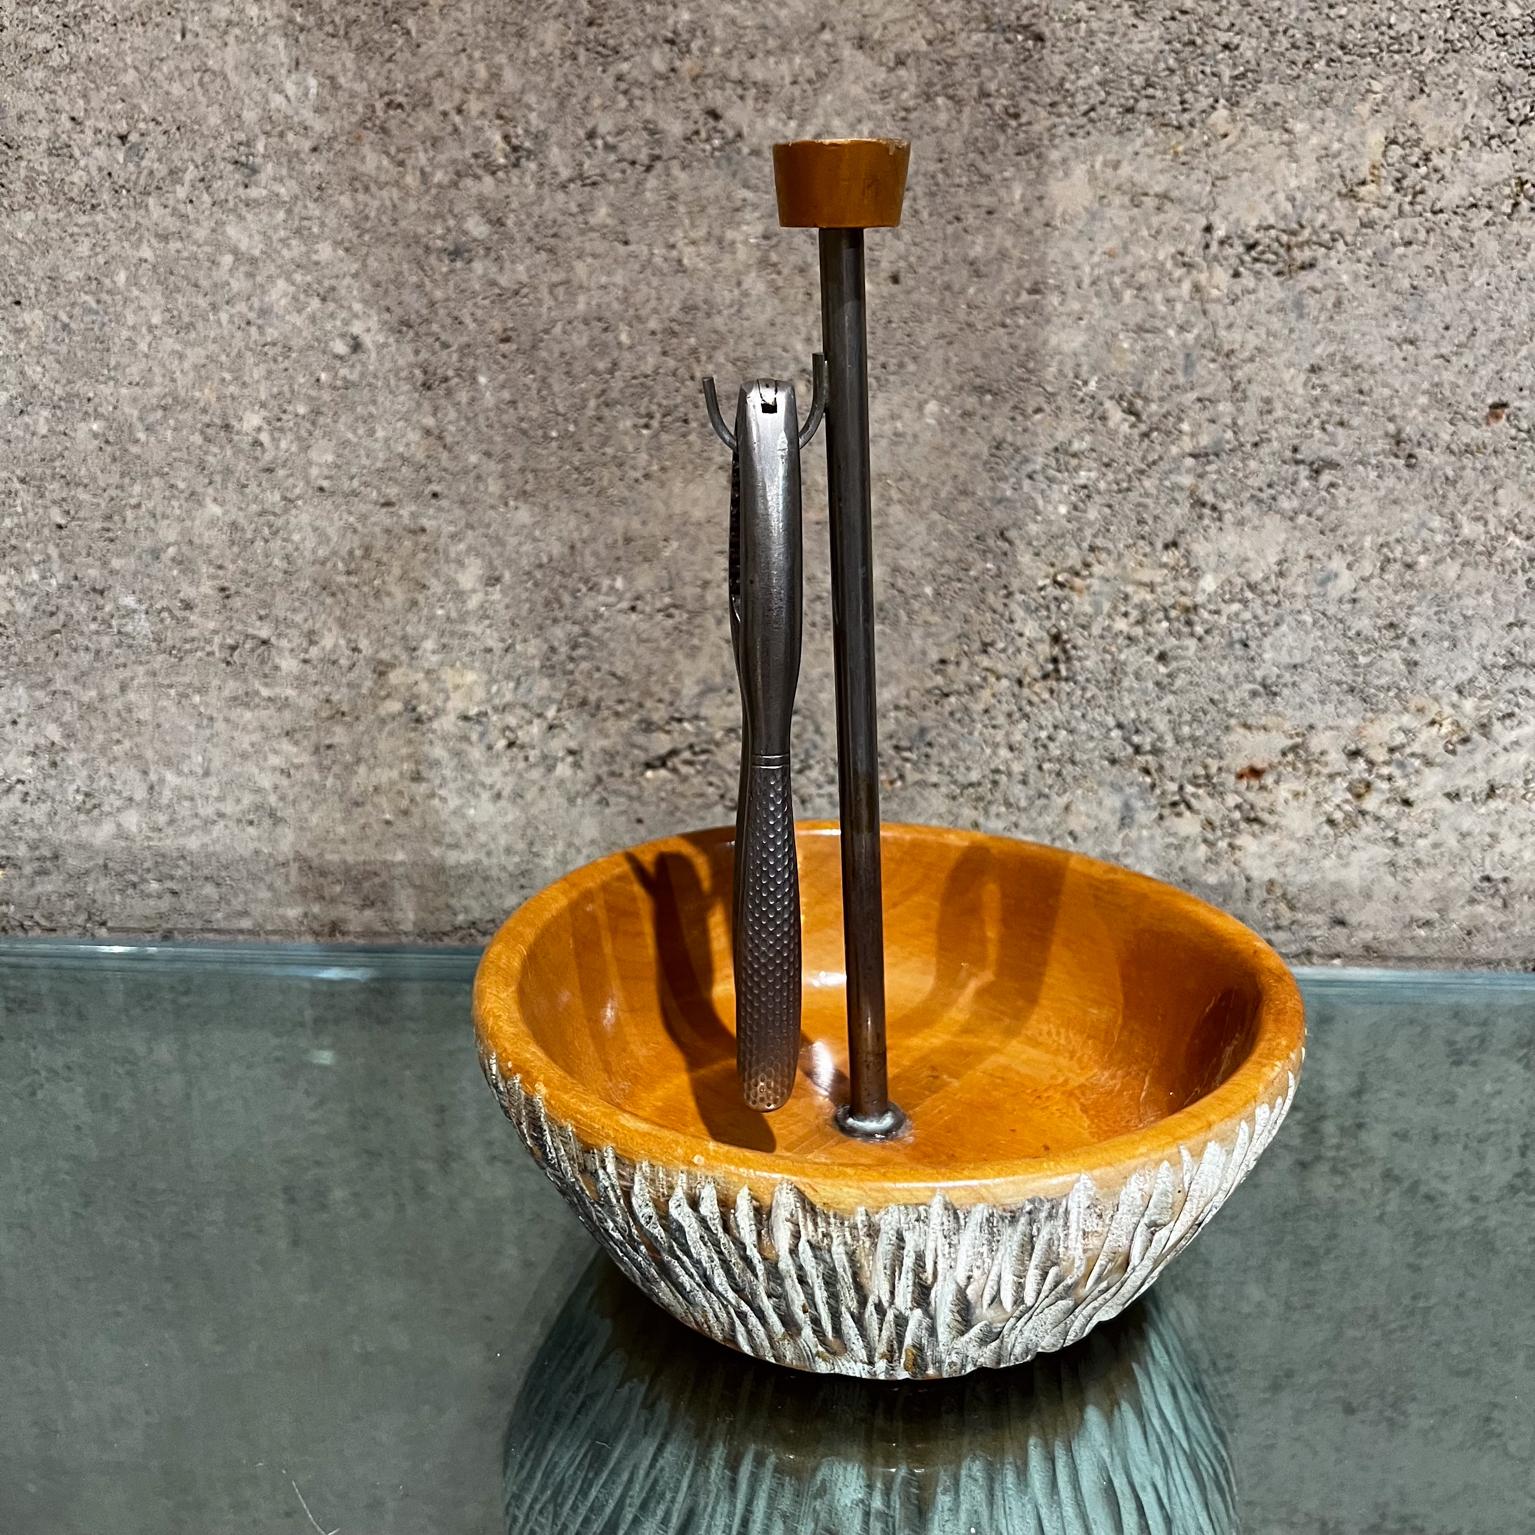 1960s Aldo Tura Sculptural Wood Bowl Stainless Steel Nutcracker Macabo ITALY  In Good Condition For Sale In Chula Vista, CA